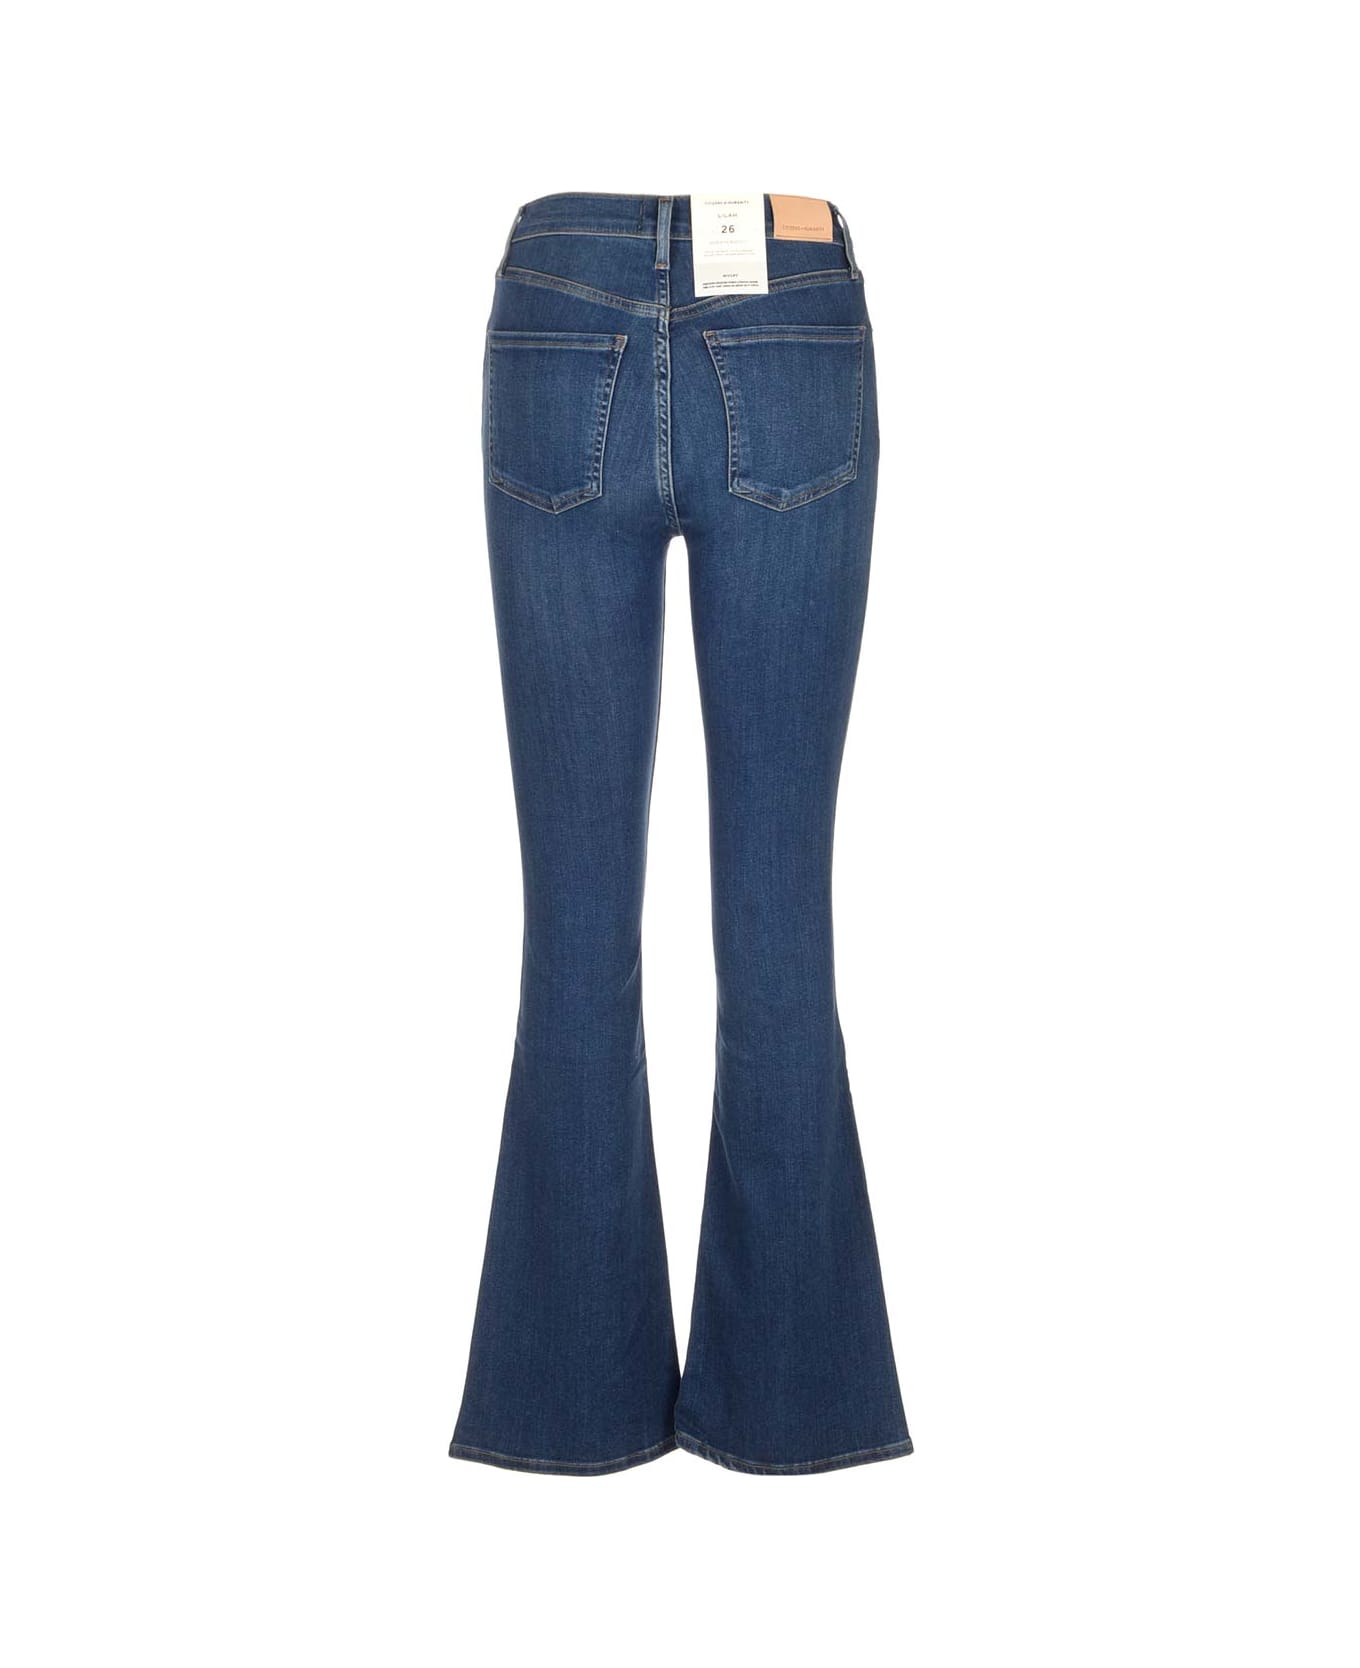 Citizens of Humanity "lilah" Bootcut Jeans - Blue